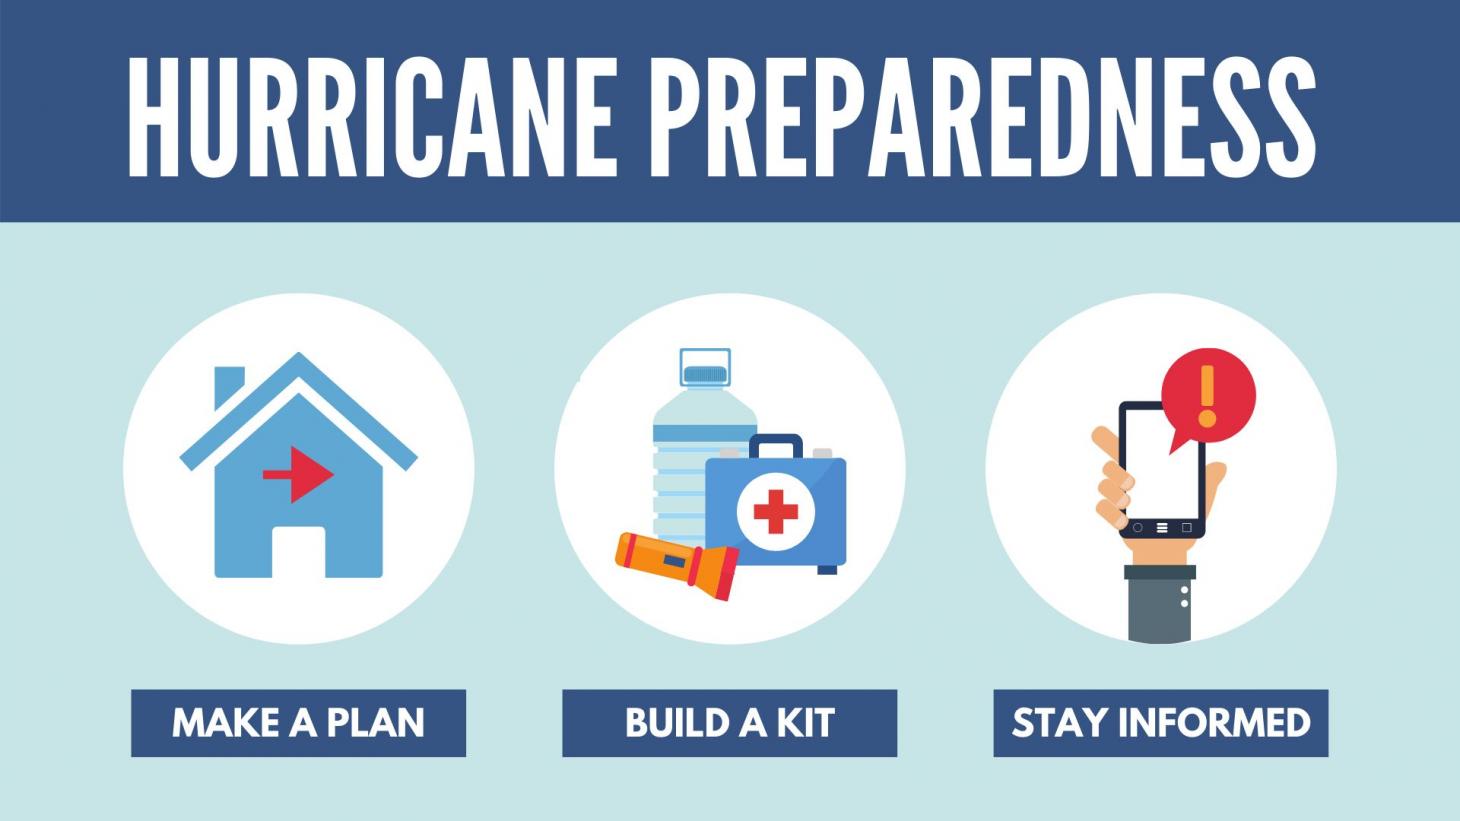 Are you ready for a hurricane? Do you have an emergency supply kit ready for your family? We can help you prepare!